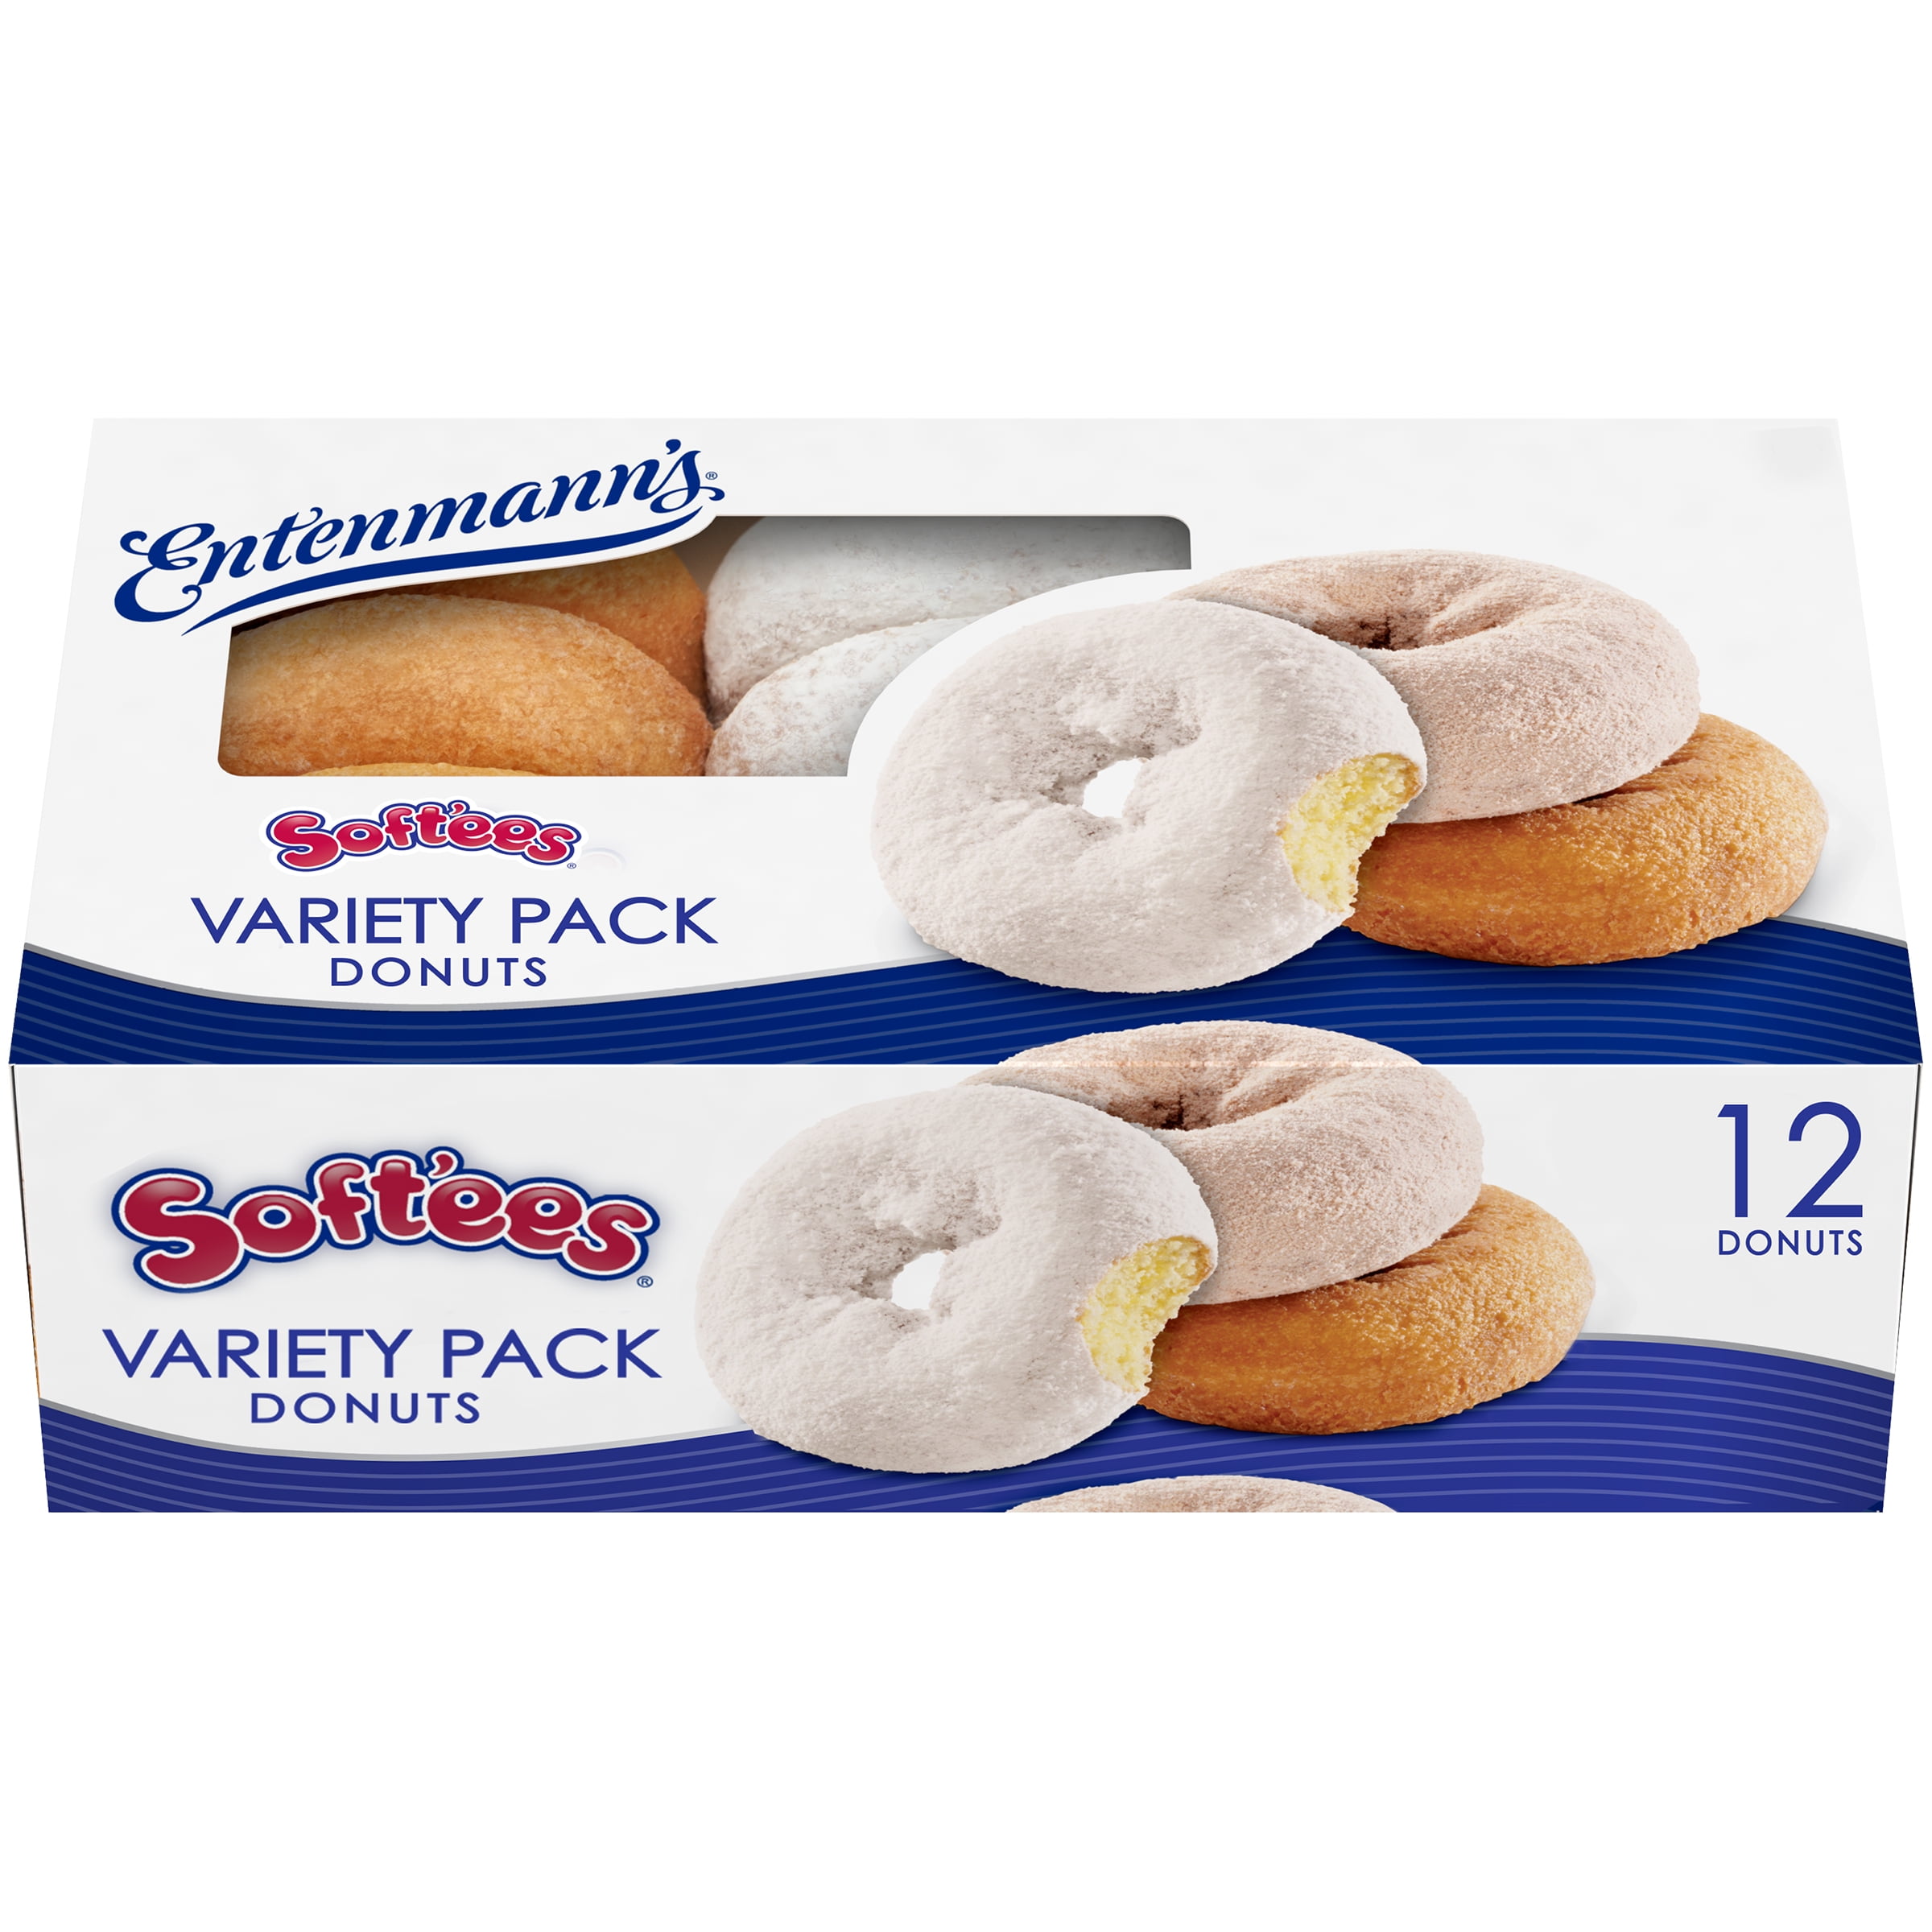 entenmann-s-soft-ees-variety-pack-donuts-12-count-walmart-inventory